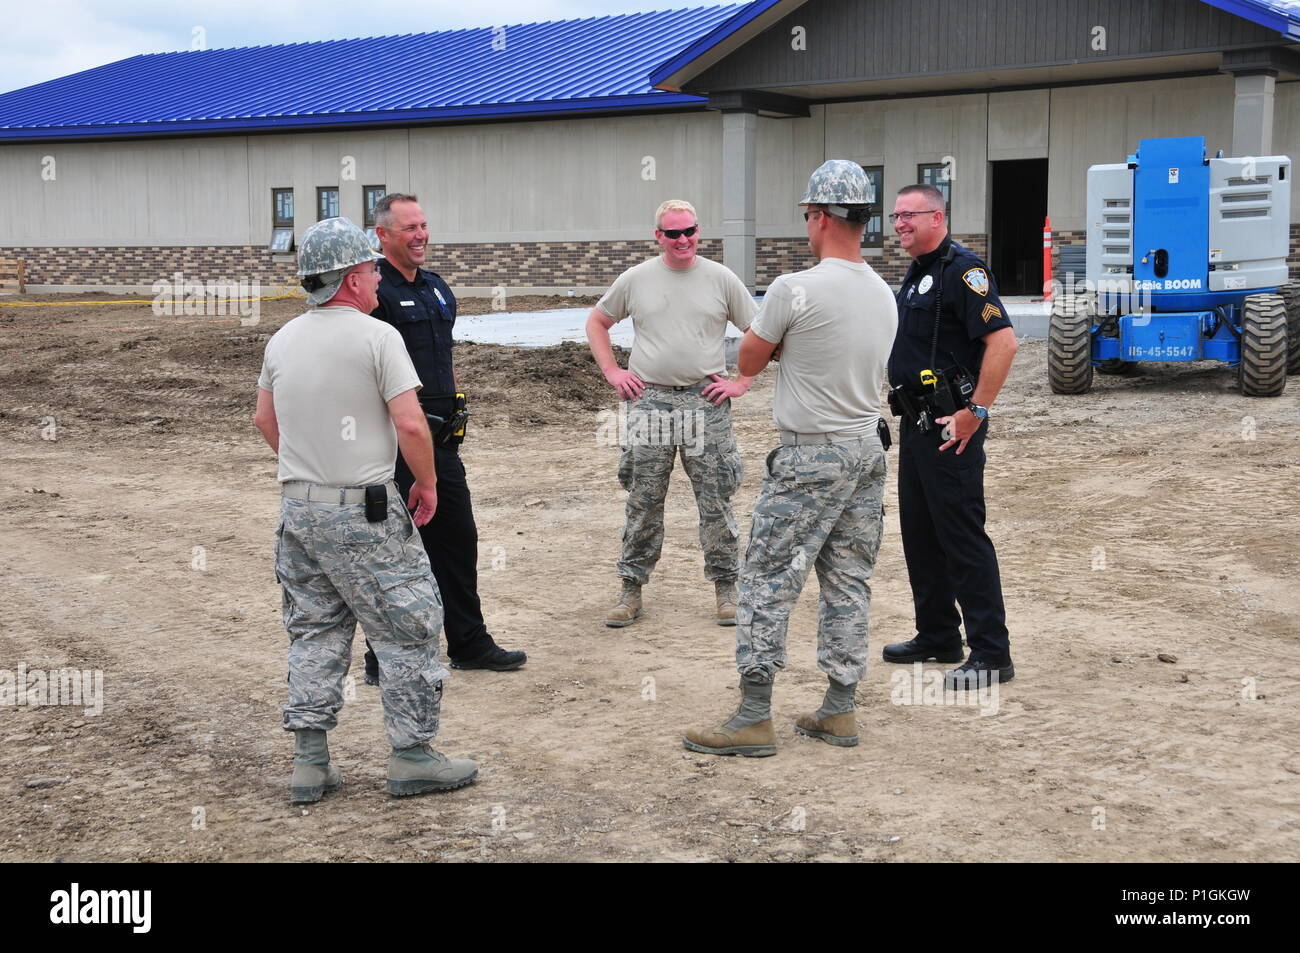 Pennsylvania Air National Guardsmen with the 171st Air Refueling Wing Civil Engineer Squadron deployed to Lincoln, Nebraska, to continue construction work on the Lincoln Police Department’s new Law Enforcement Training Center, August, 2016.  The project, part of the Innovative Readiness Training program, provided 171 CES members training while addressing public and civil-society needs.   (Air National Guard photo by Staff Sgt. Allyson L. Manners) Stock Photo